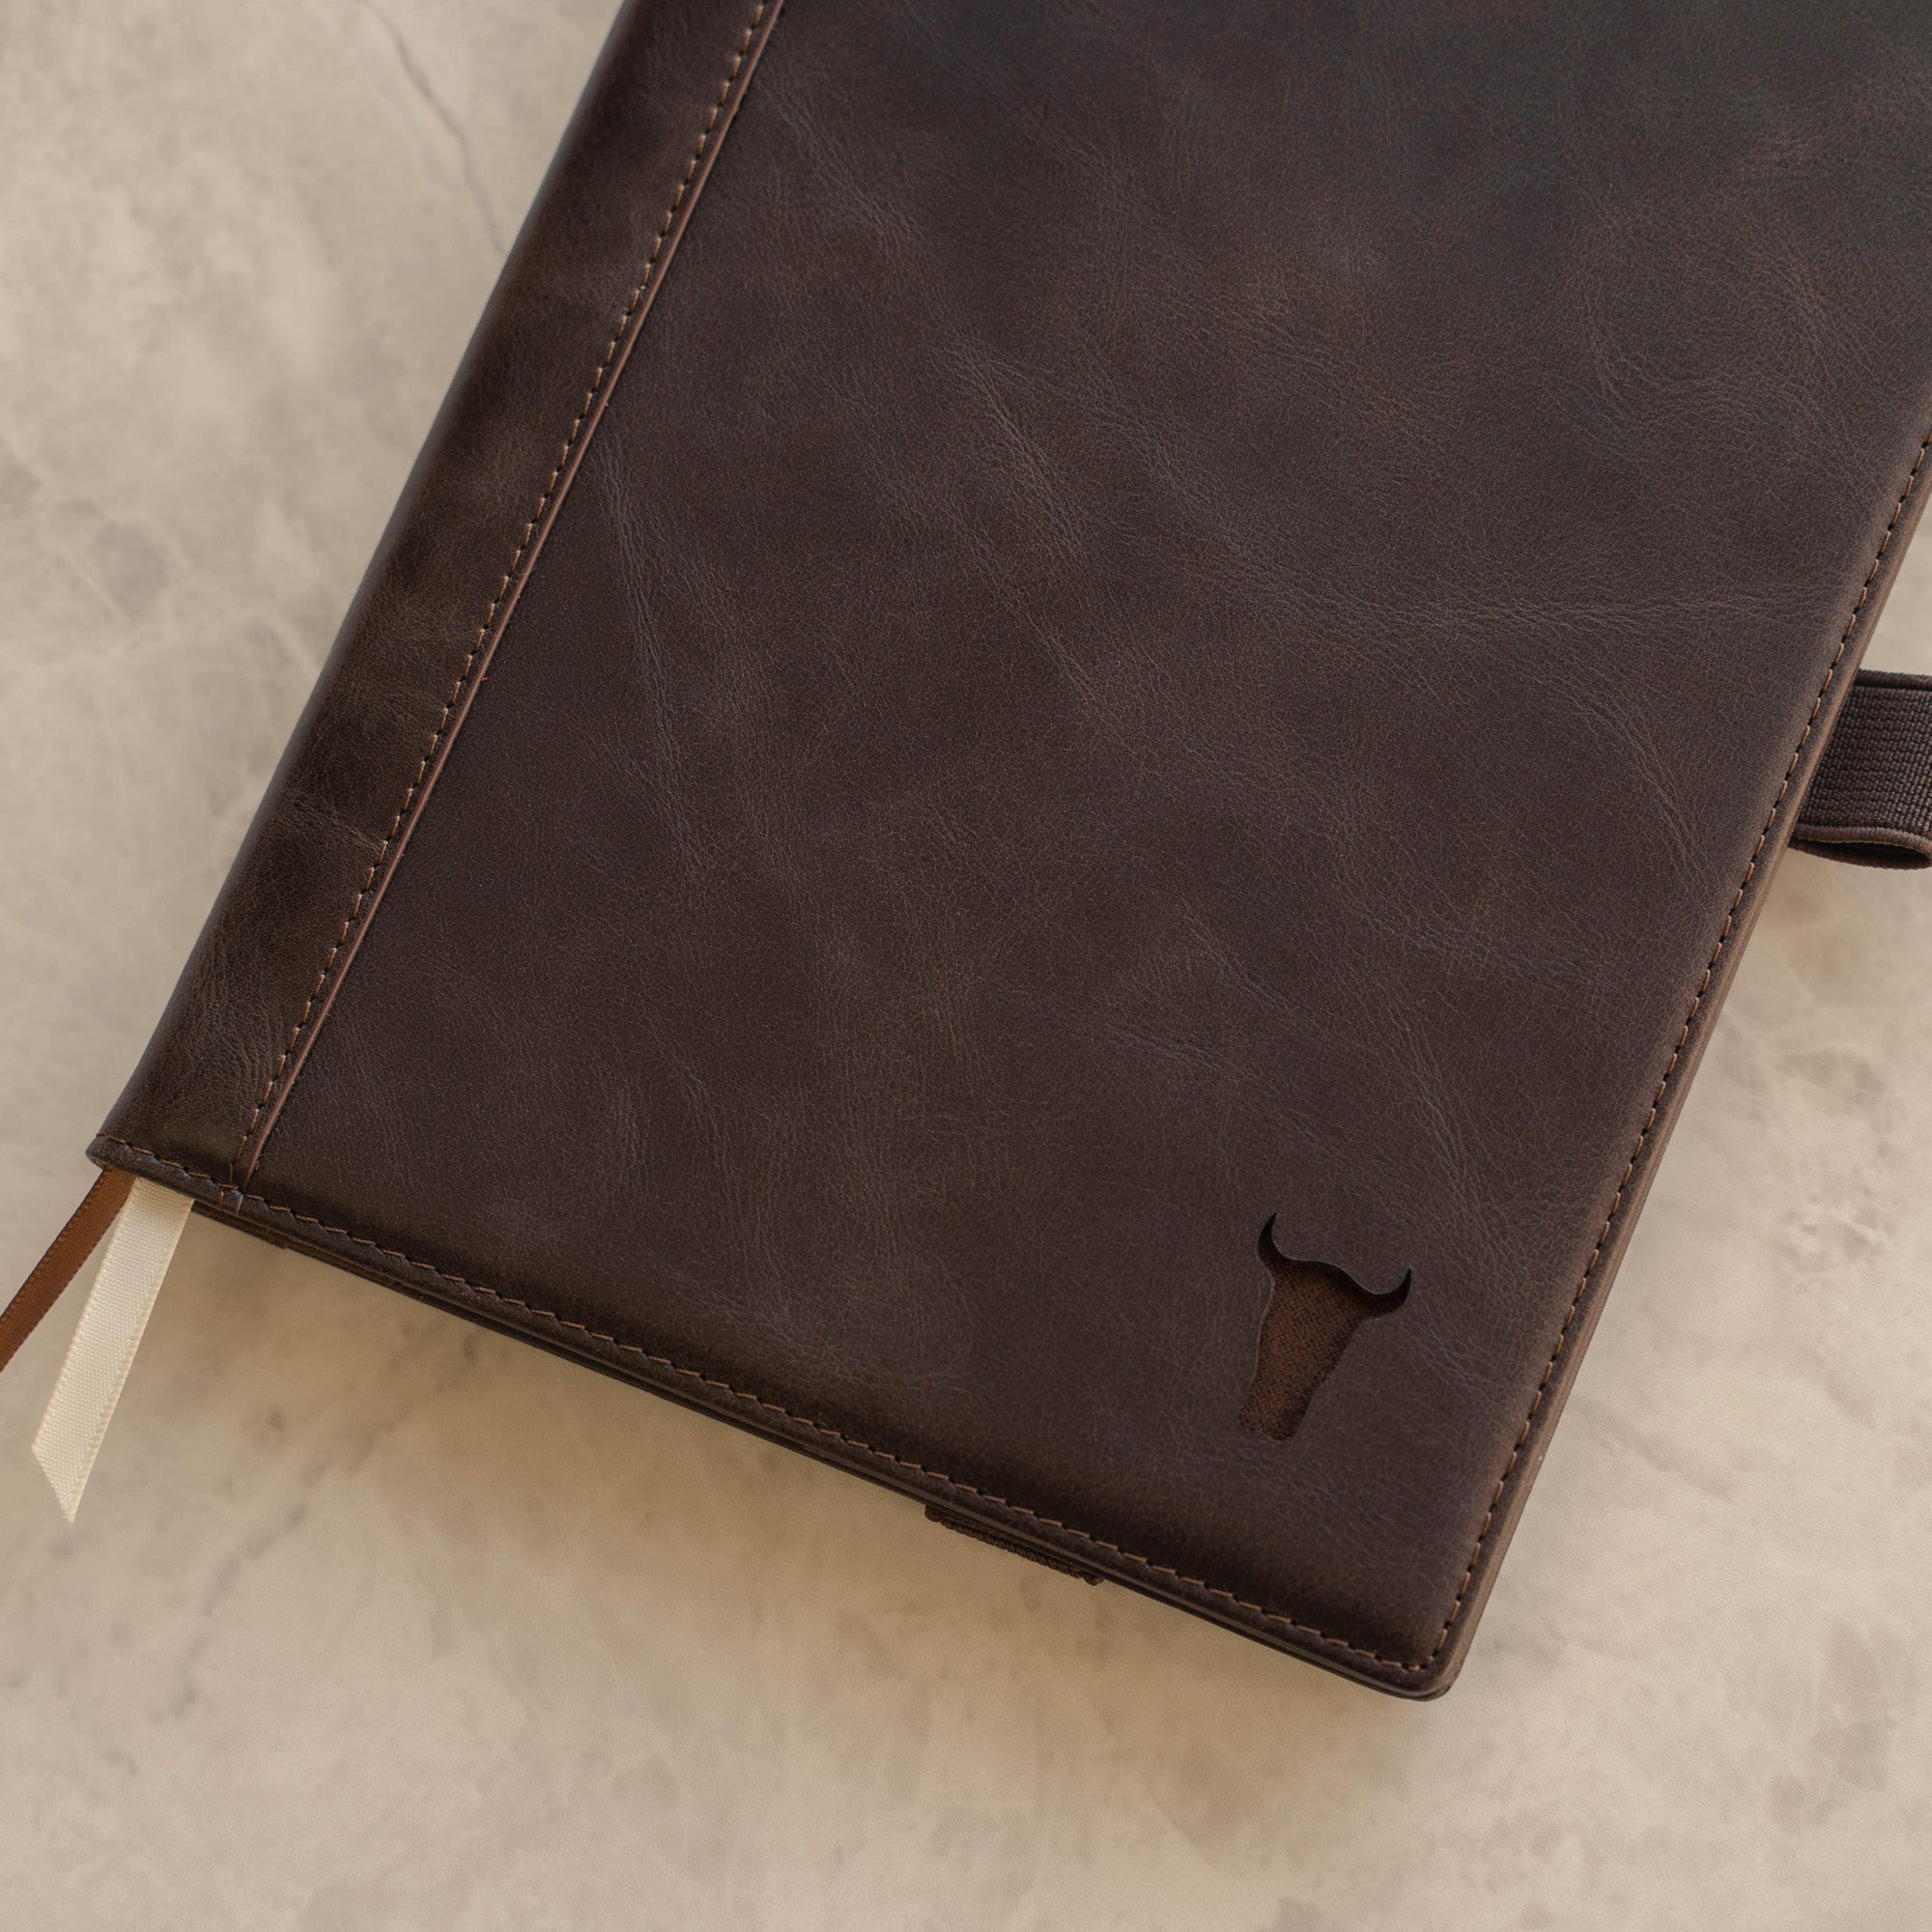 A4 / A5 Leather Notebook Cover (with Notebook Insert)